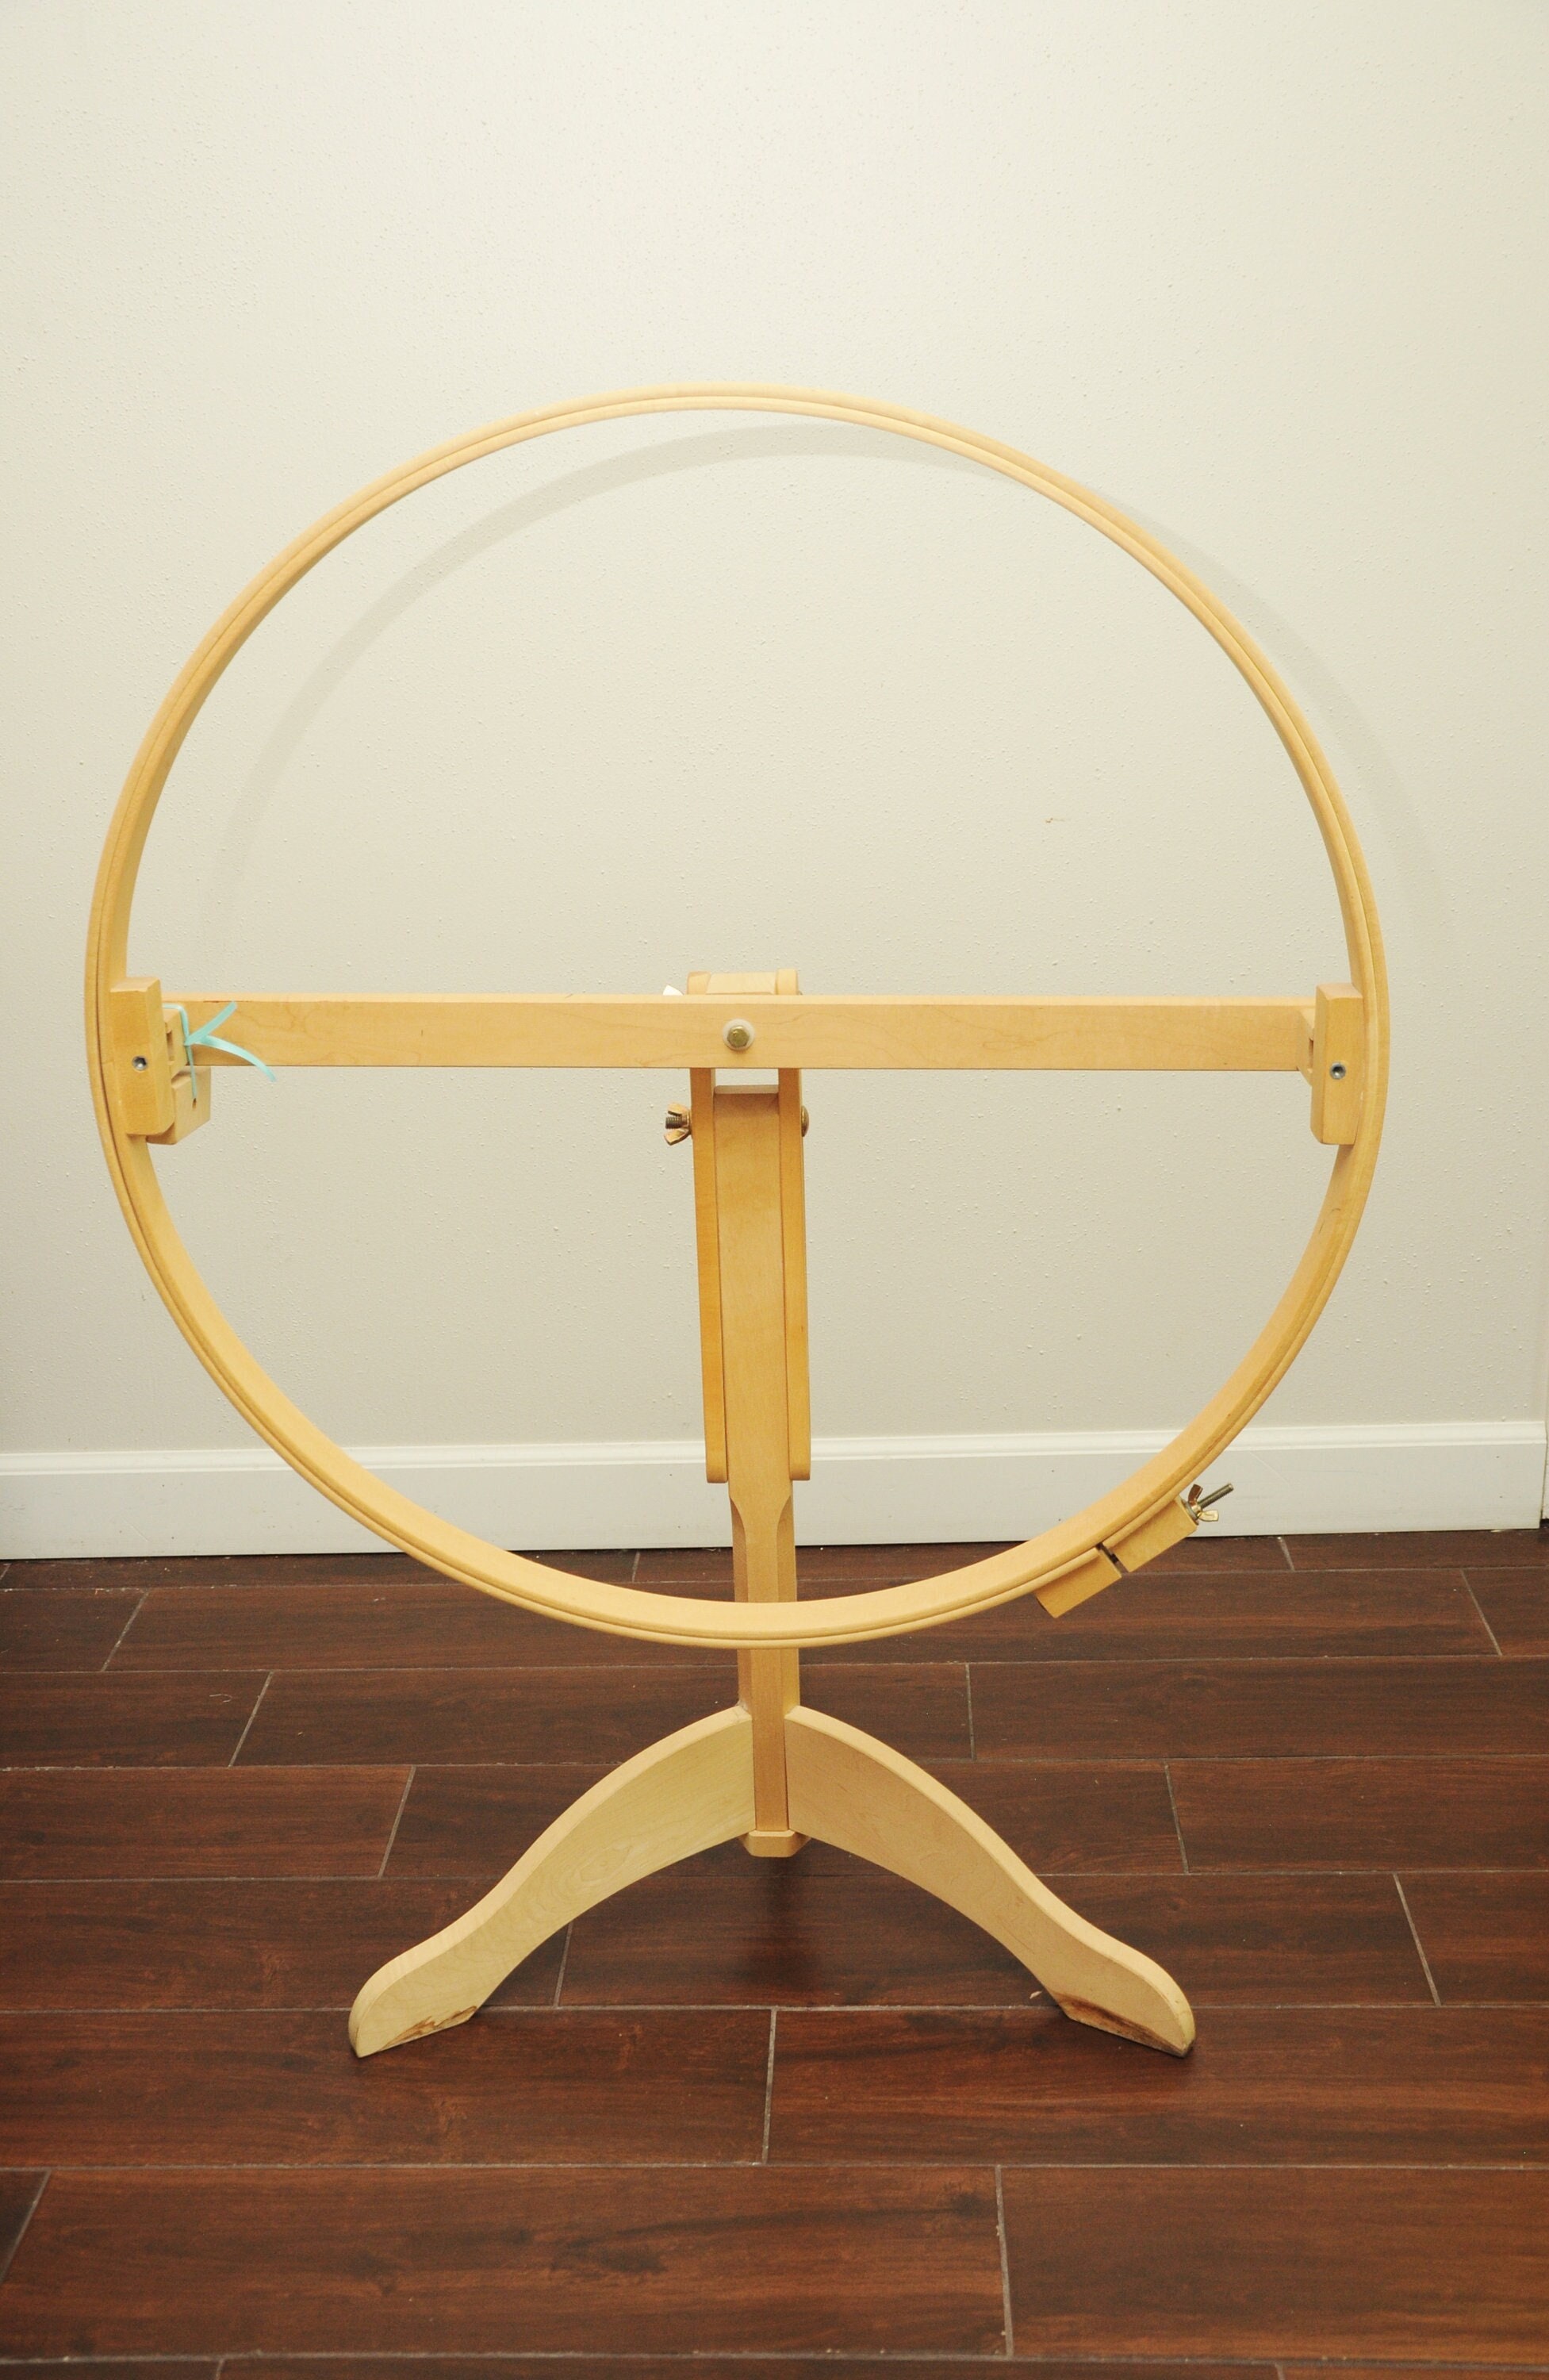 Hinterberg 22” Solid Oak Quilting Hoop With Stand for Sale in Bellevue, WA  - OfferUp